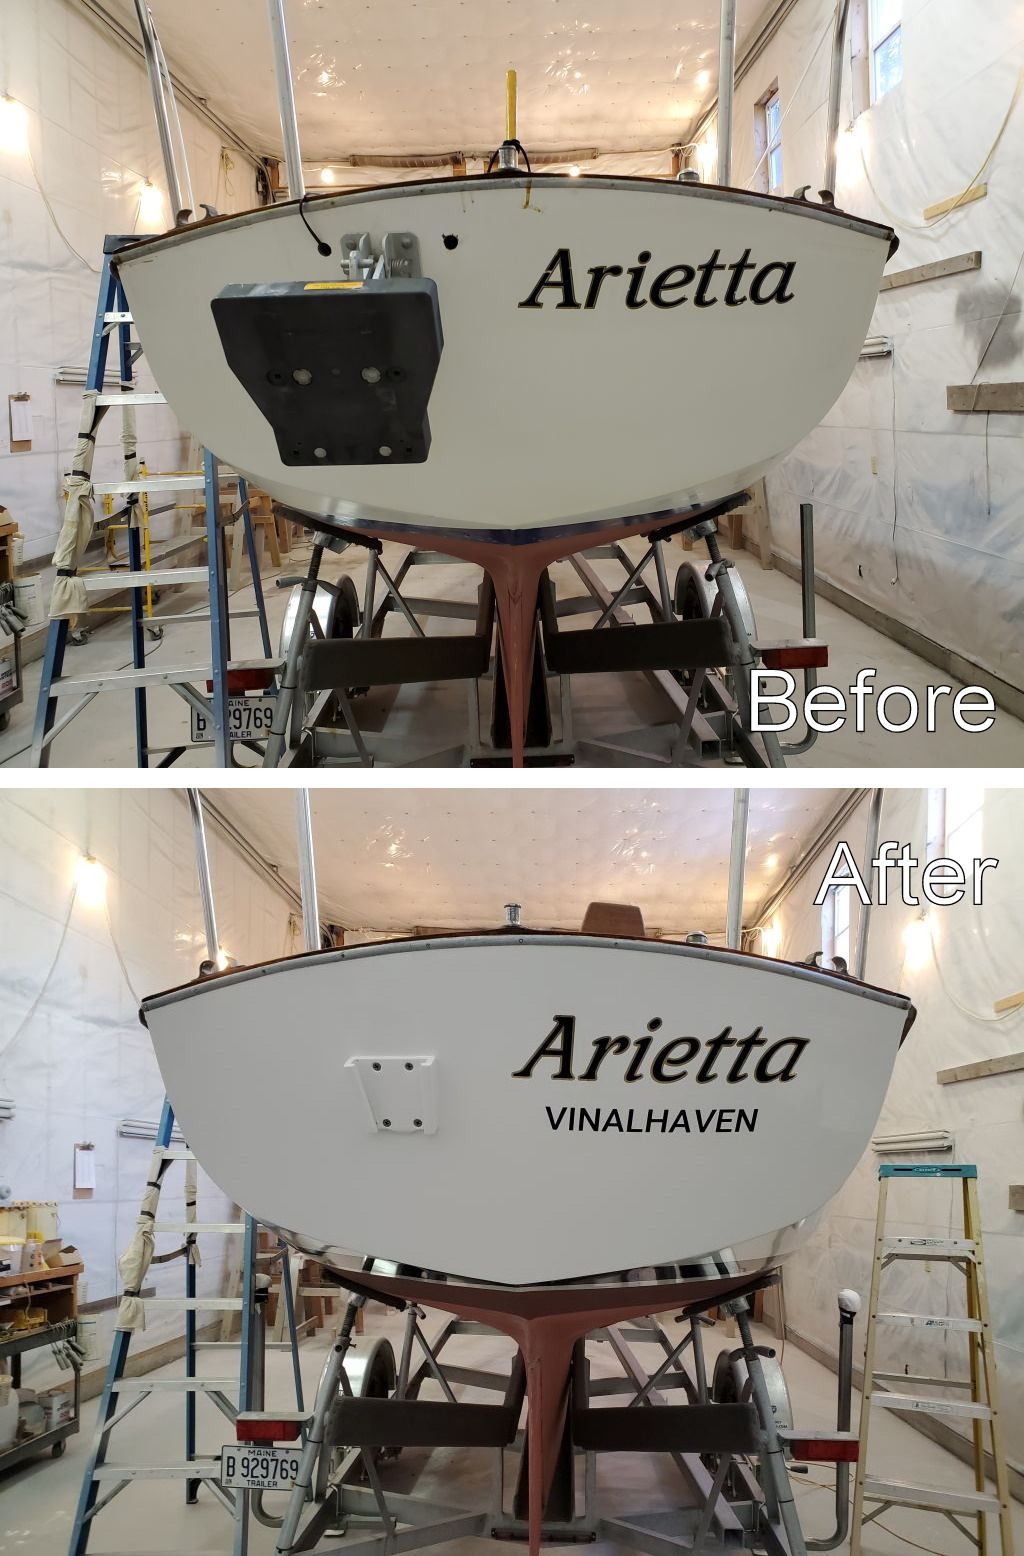 Arietta's transom before and after the refit